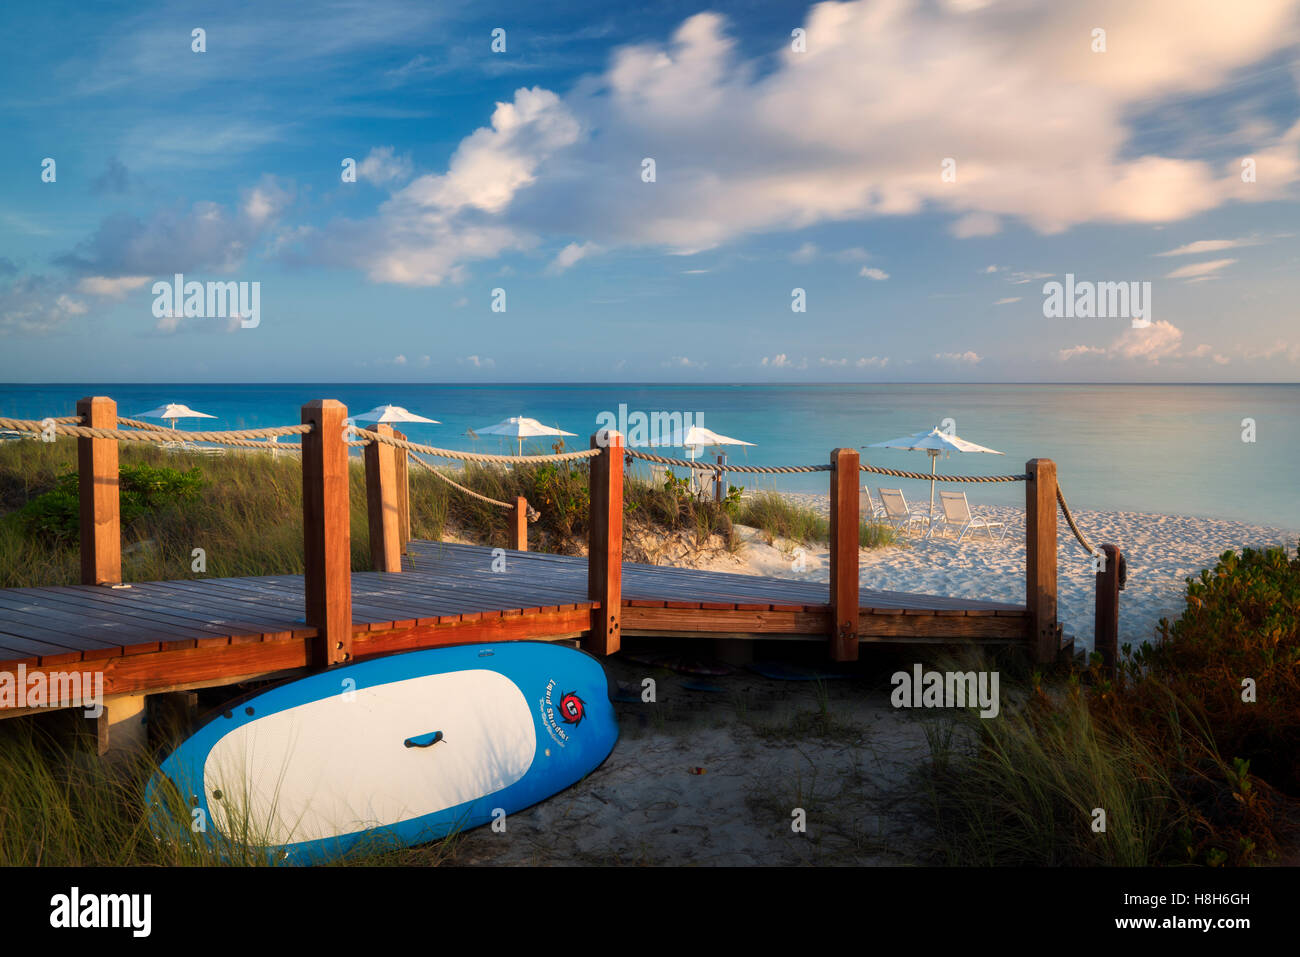 Pathway to ocean with surf board and beach umbrellas. Turks and Caicos. Providenciales. Stock Photo